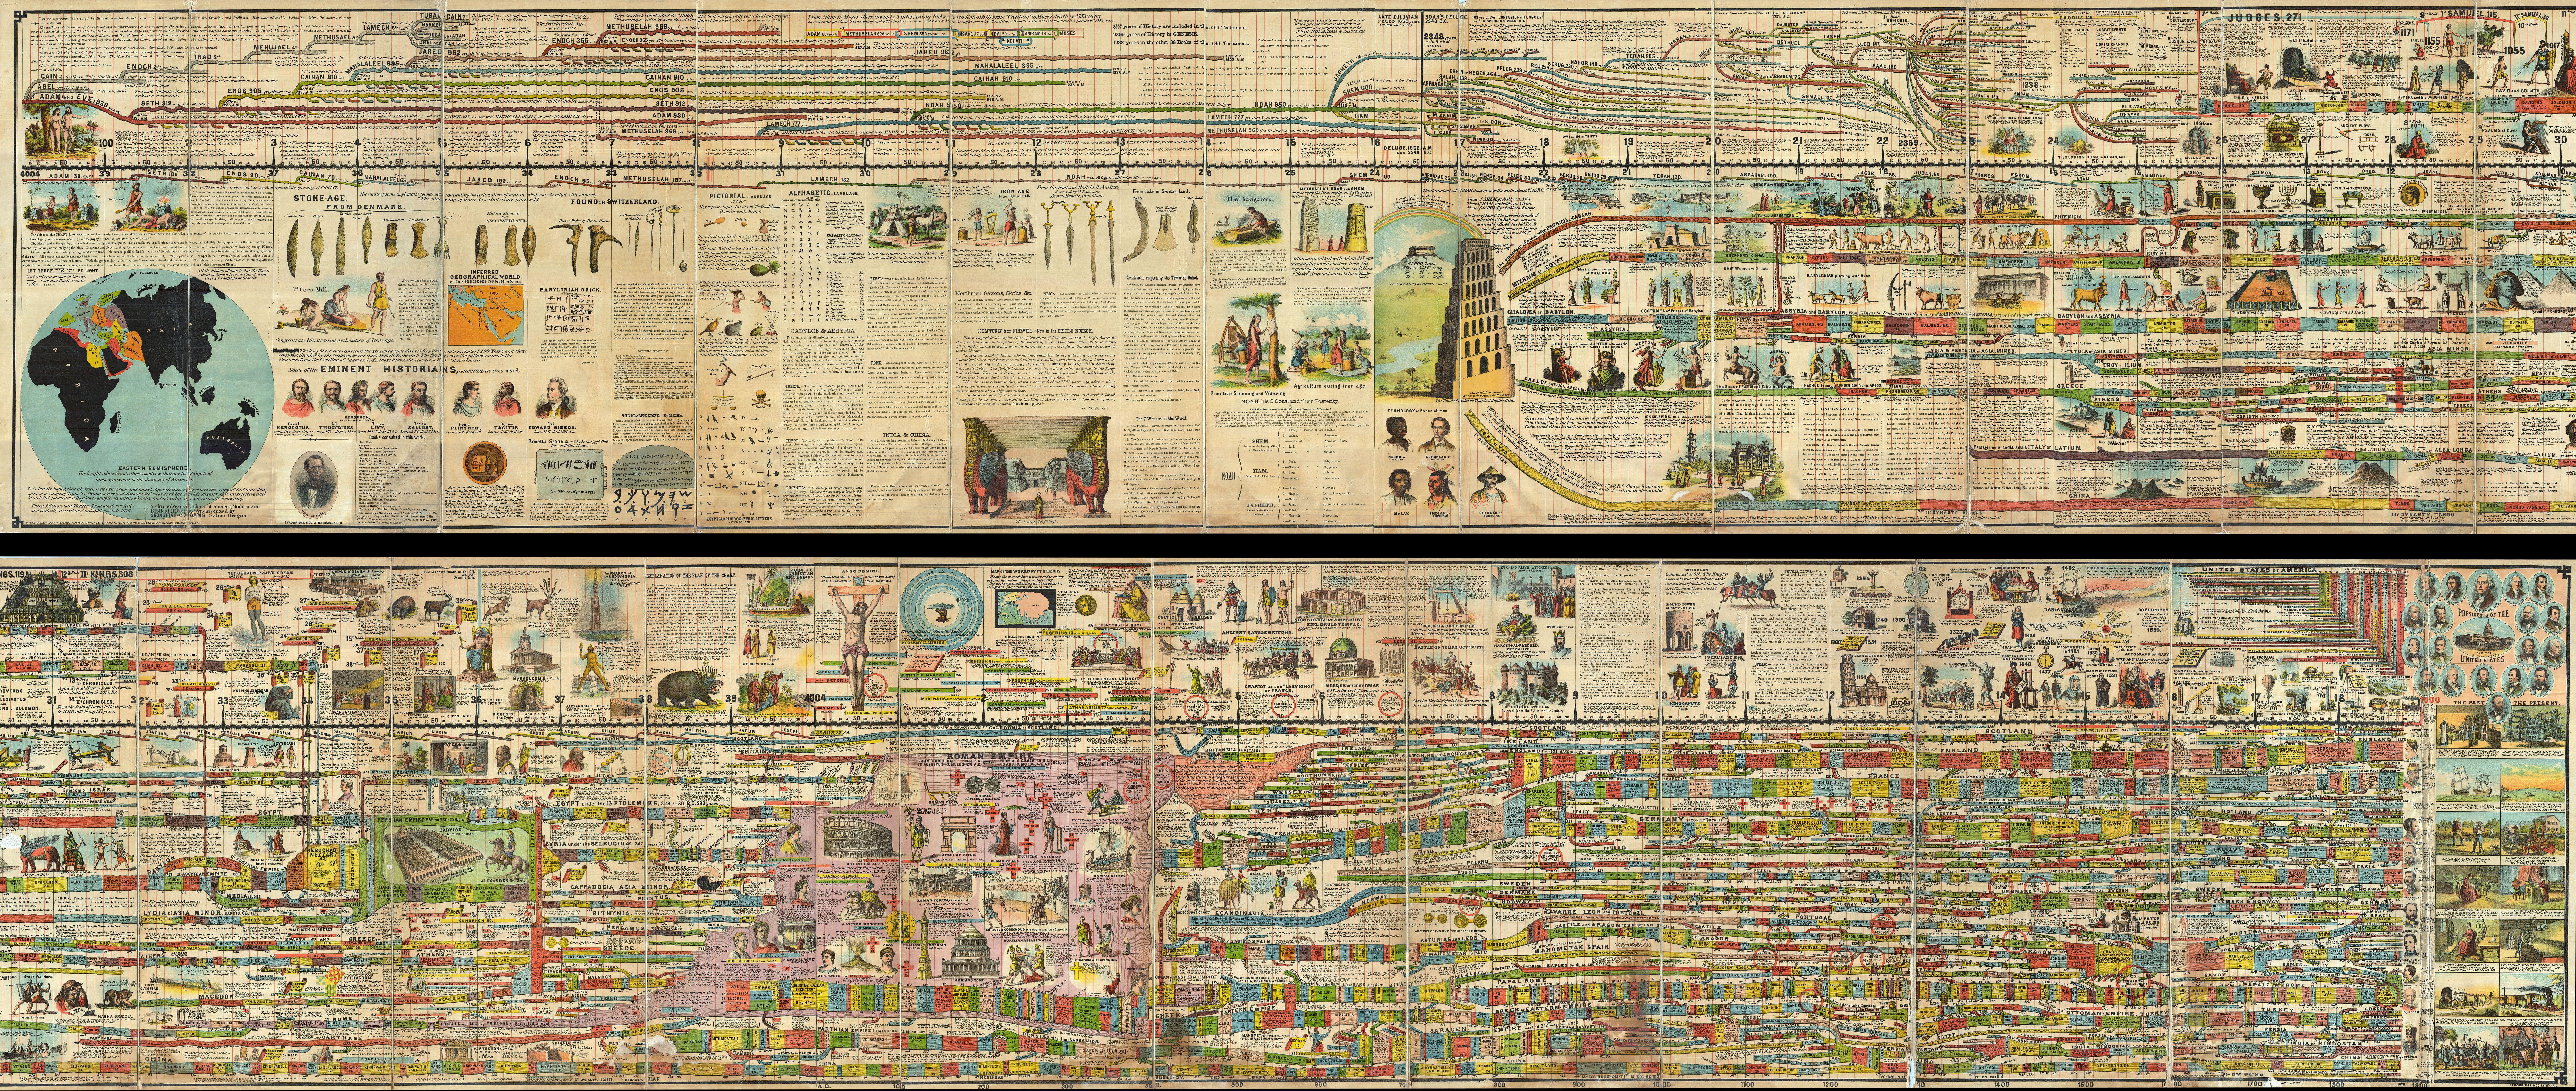 The Wall Chart Of World History Book